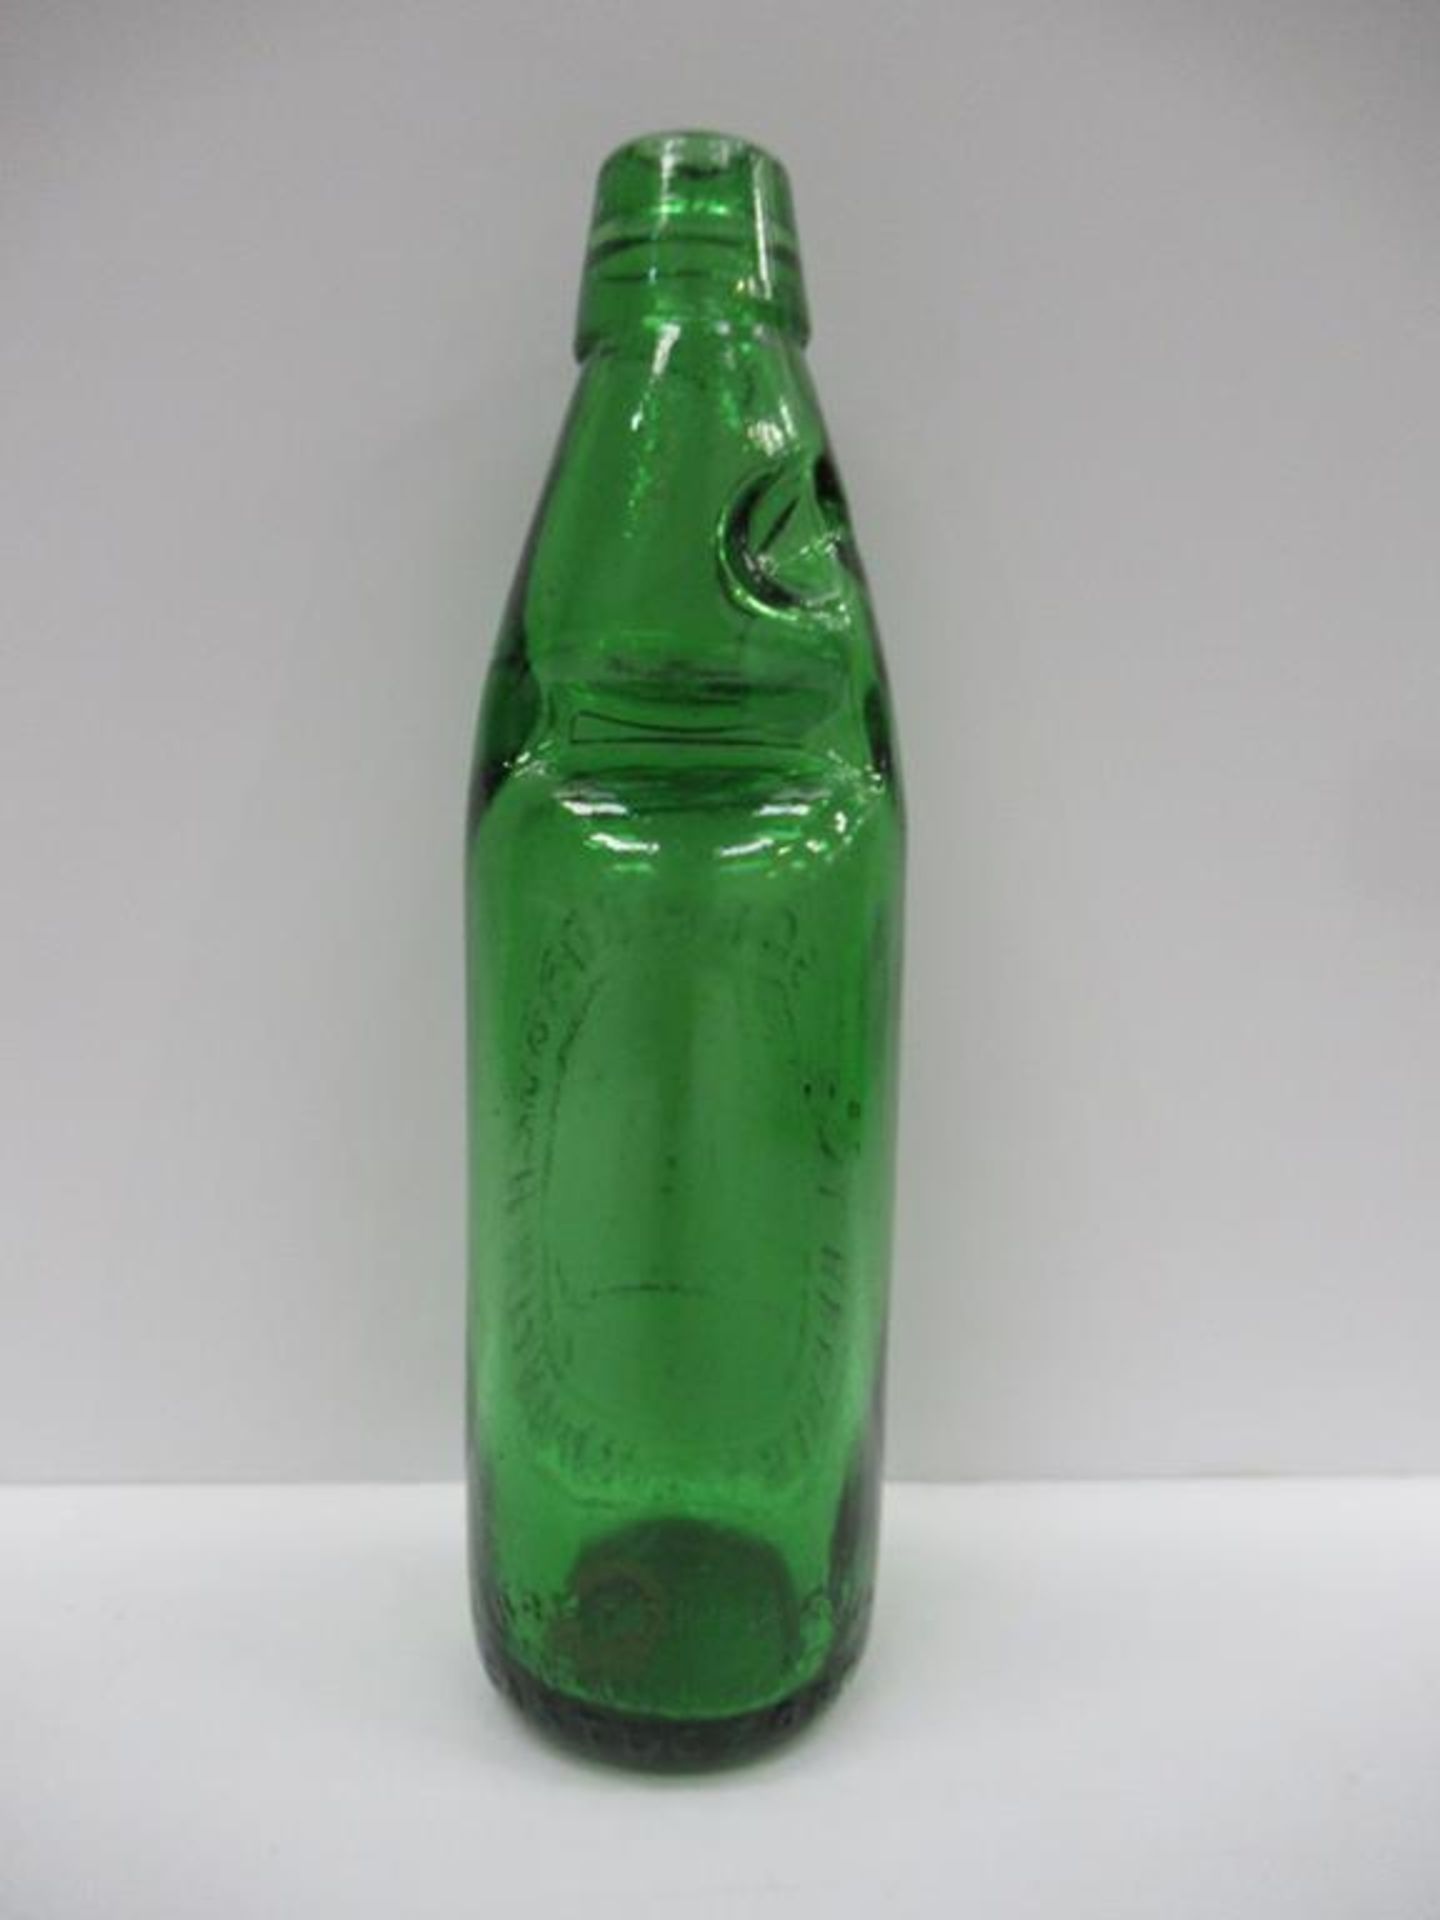 The Scarborough Brewery Co. Ltd coloured codd bottle 10oz - Image 3 of 6